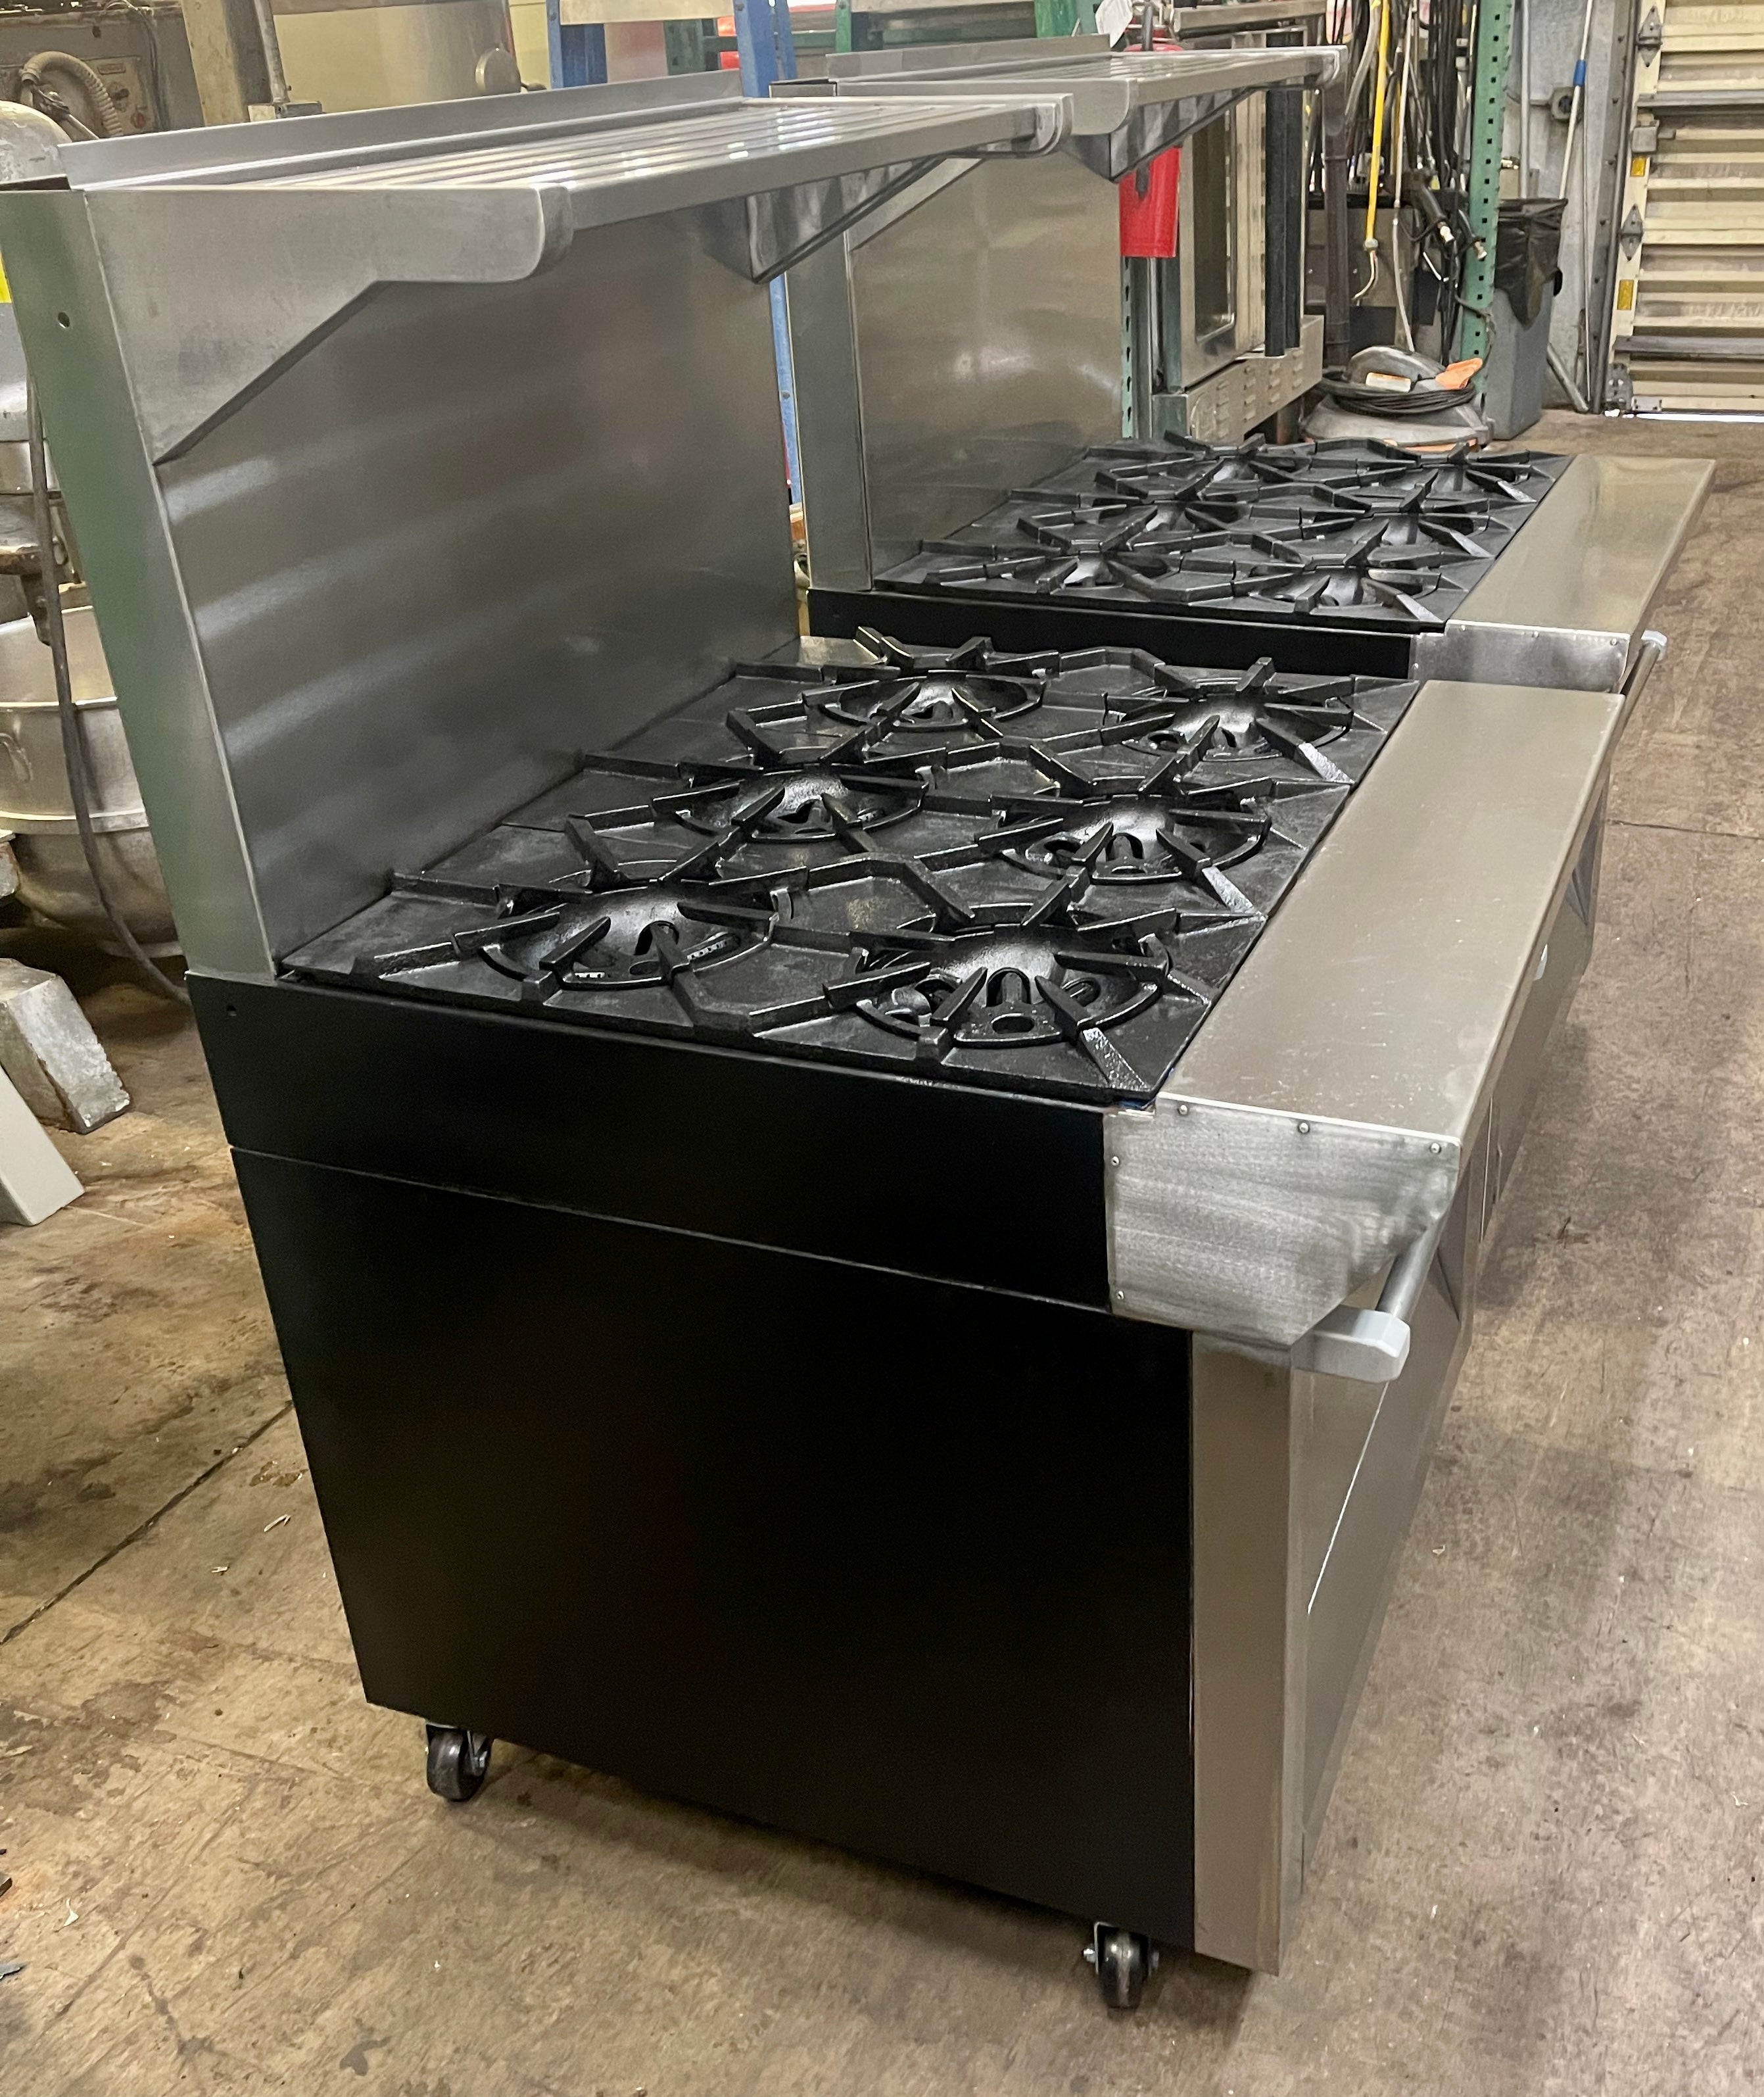 Garland reconditioned 6 burner with convection oven